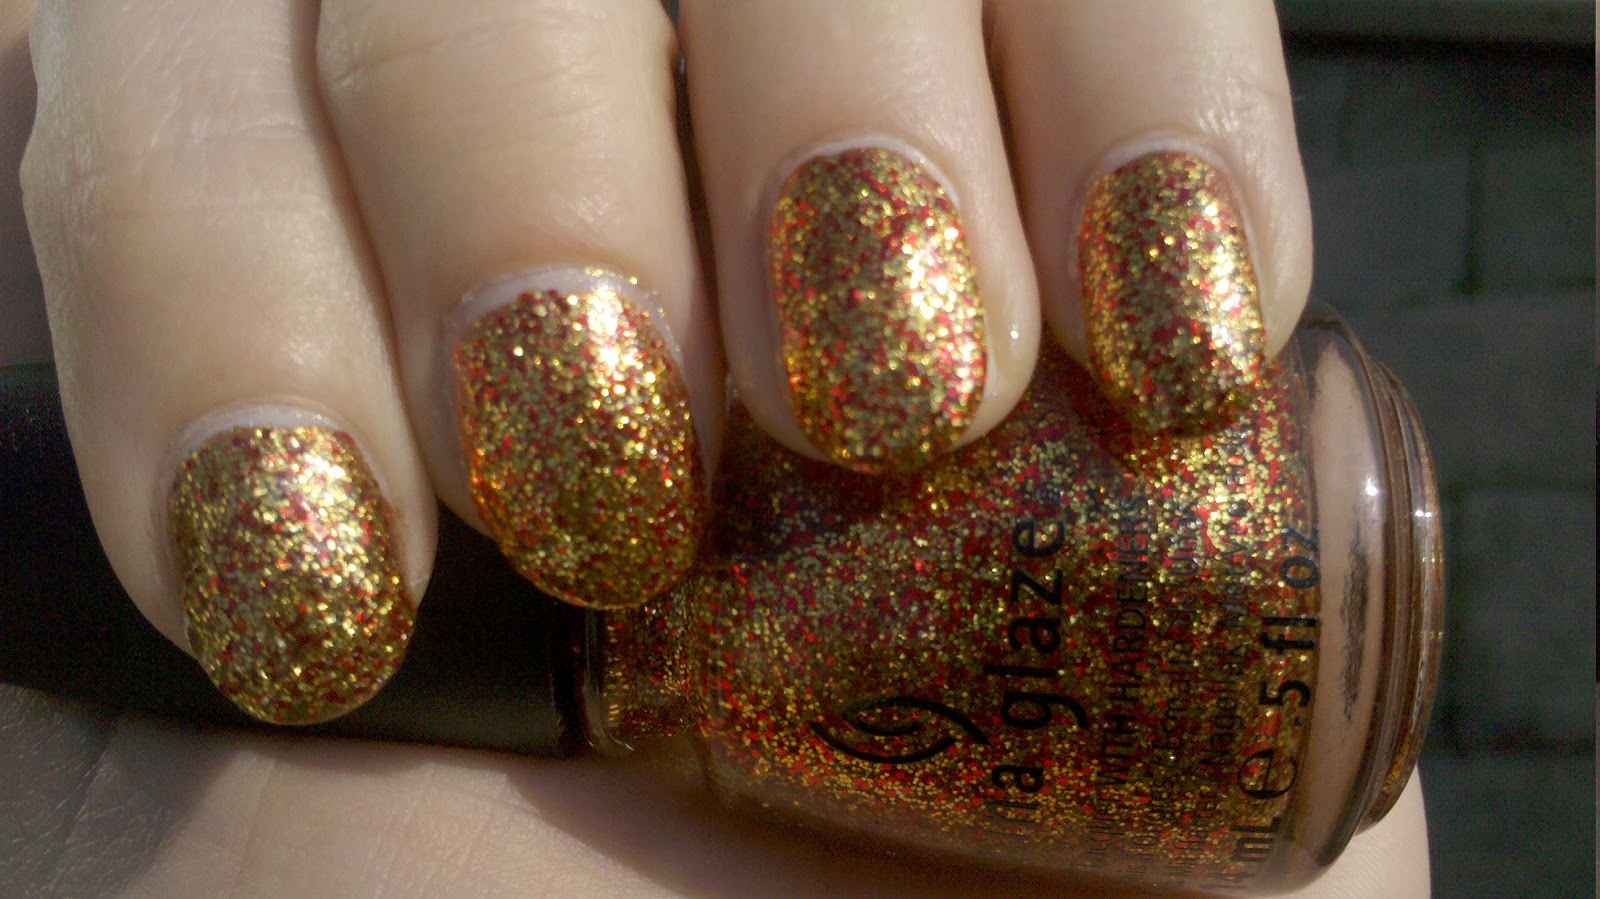 5. China Glaze Nail Lacquer - Harvest Moon - wide 4